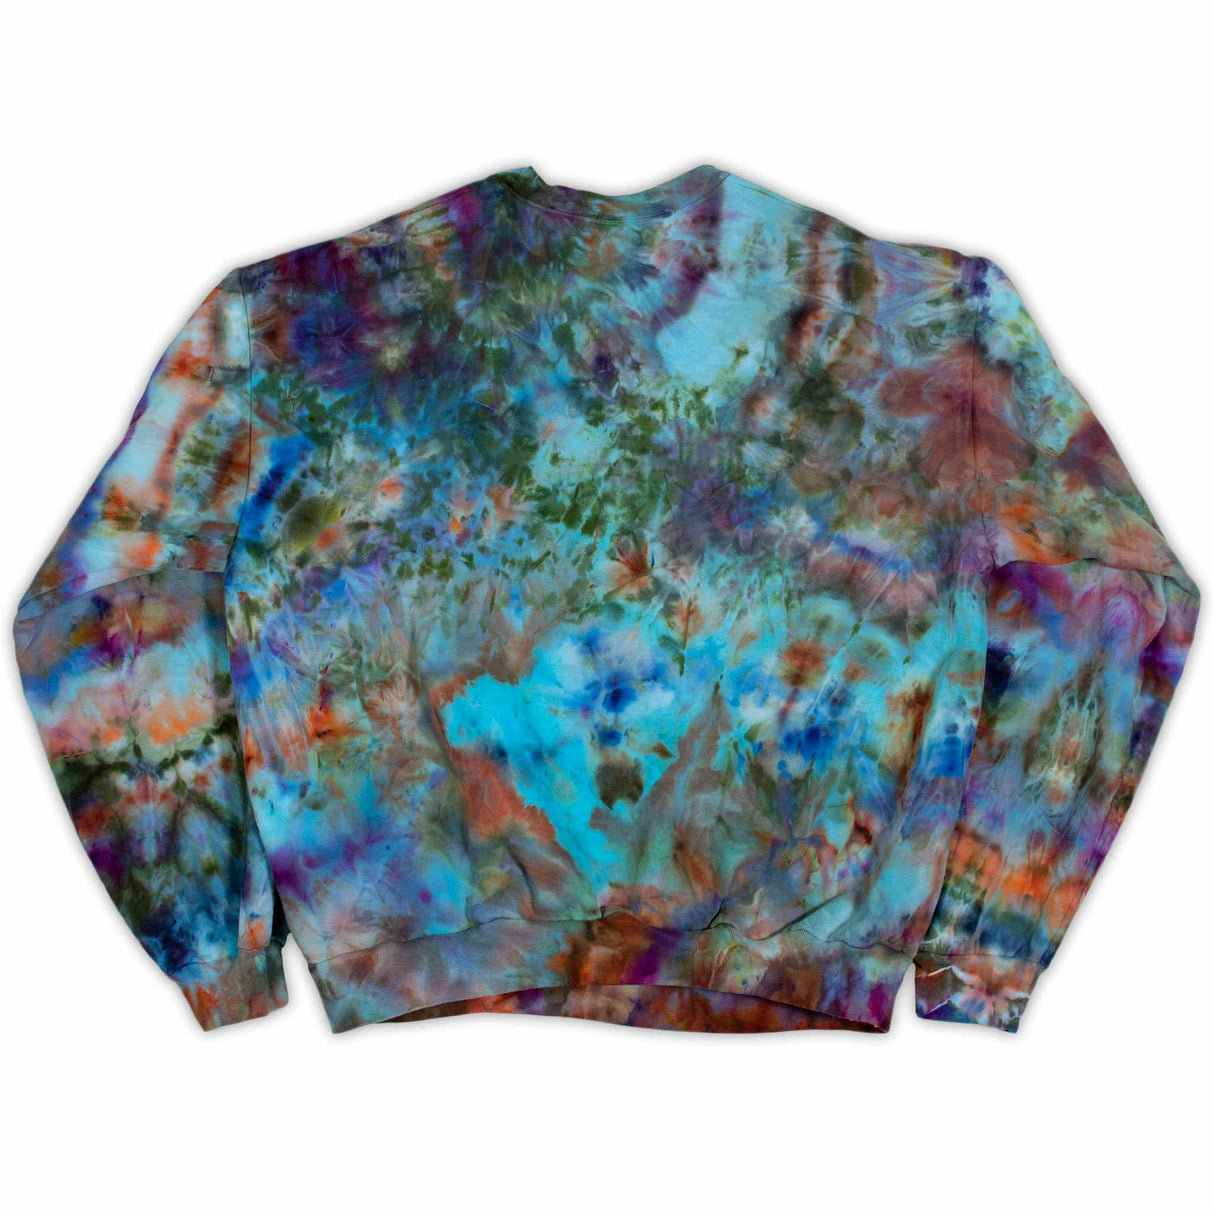 A cozy, long-sleeved sweatshirt boasts a comforting array of tie-dye patterns in cool blues, greens, and warm rust, inviting a sense of warmth and style."